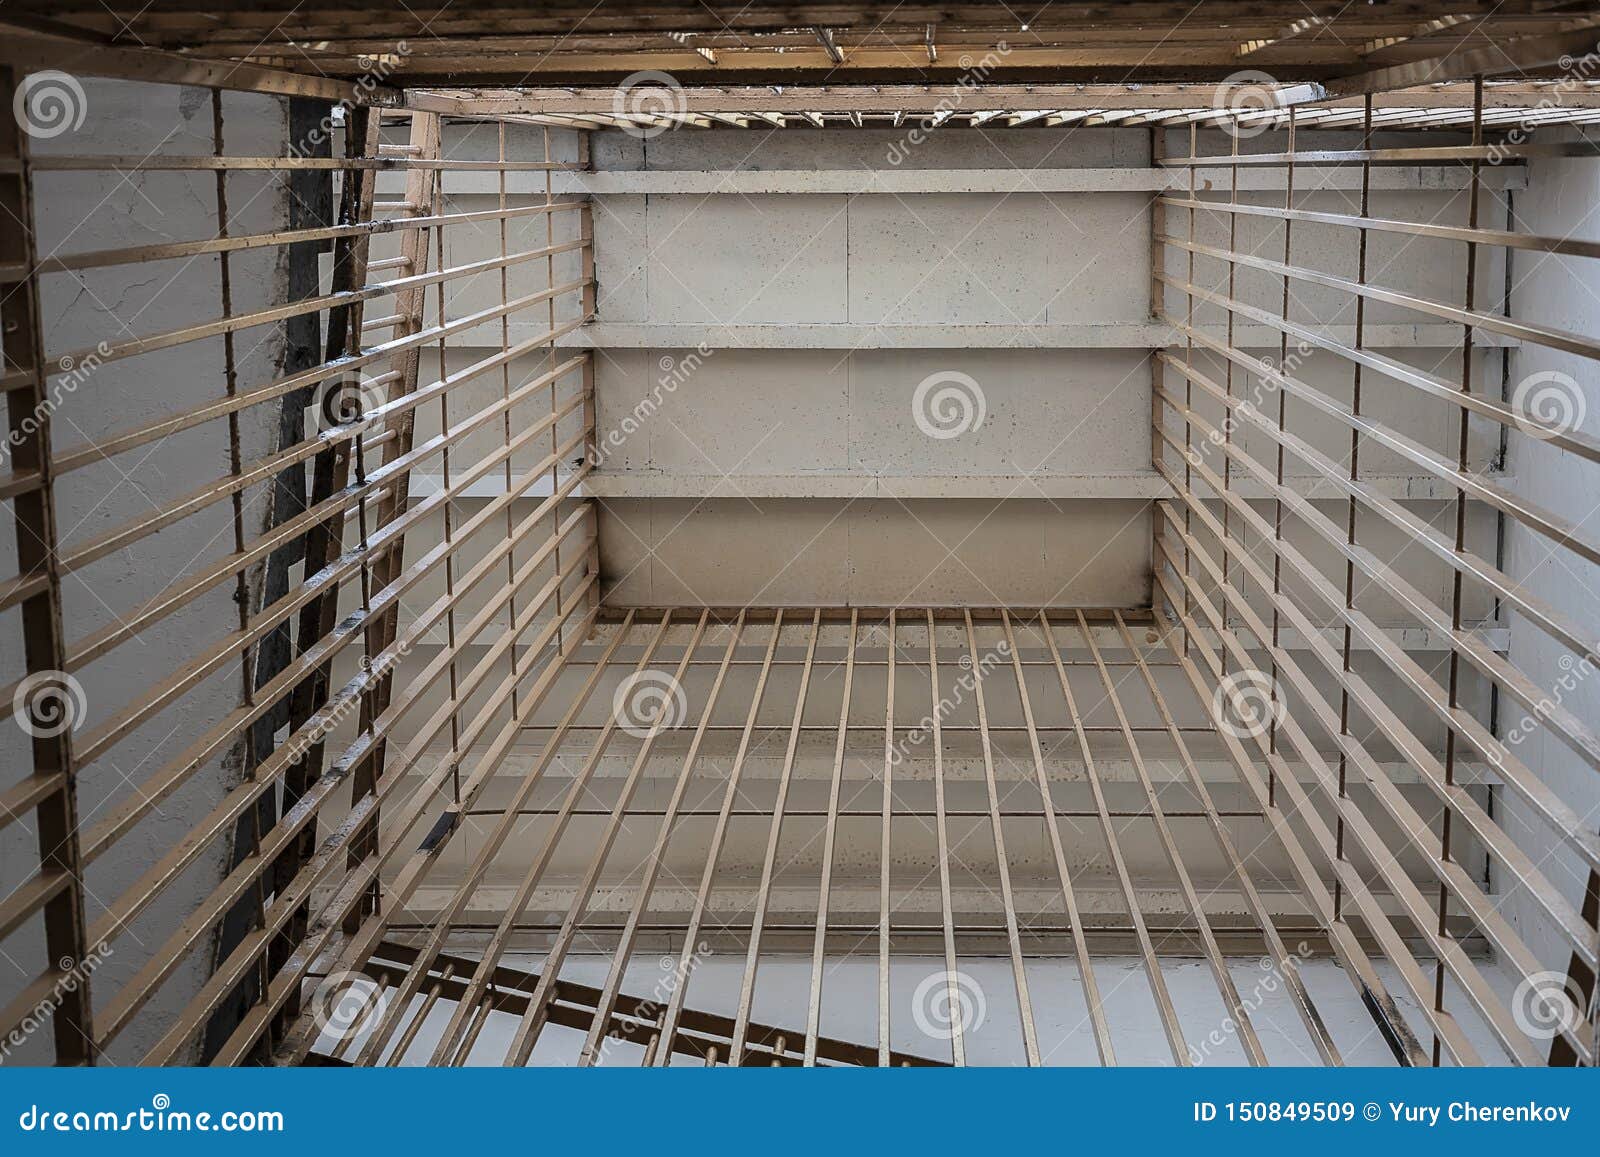 Metal Bars In The Prison Stairs Bottom View Stock Image Image Of Justice Iron